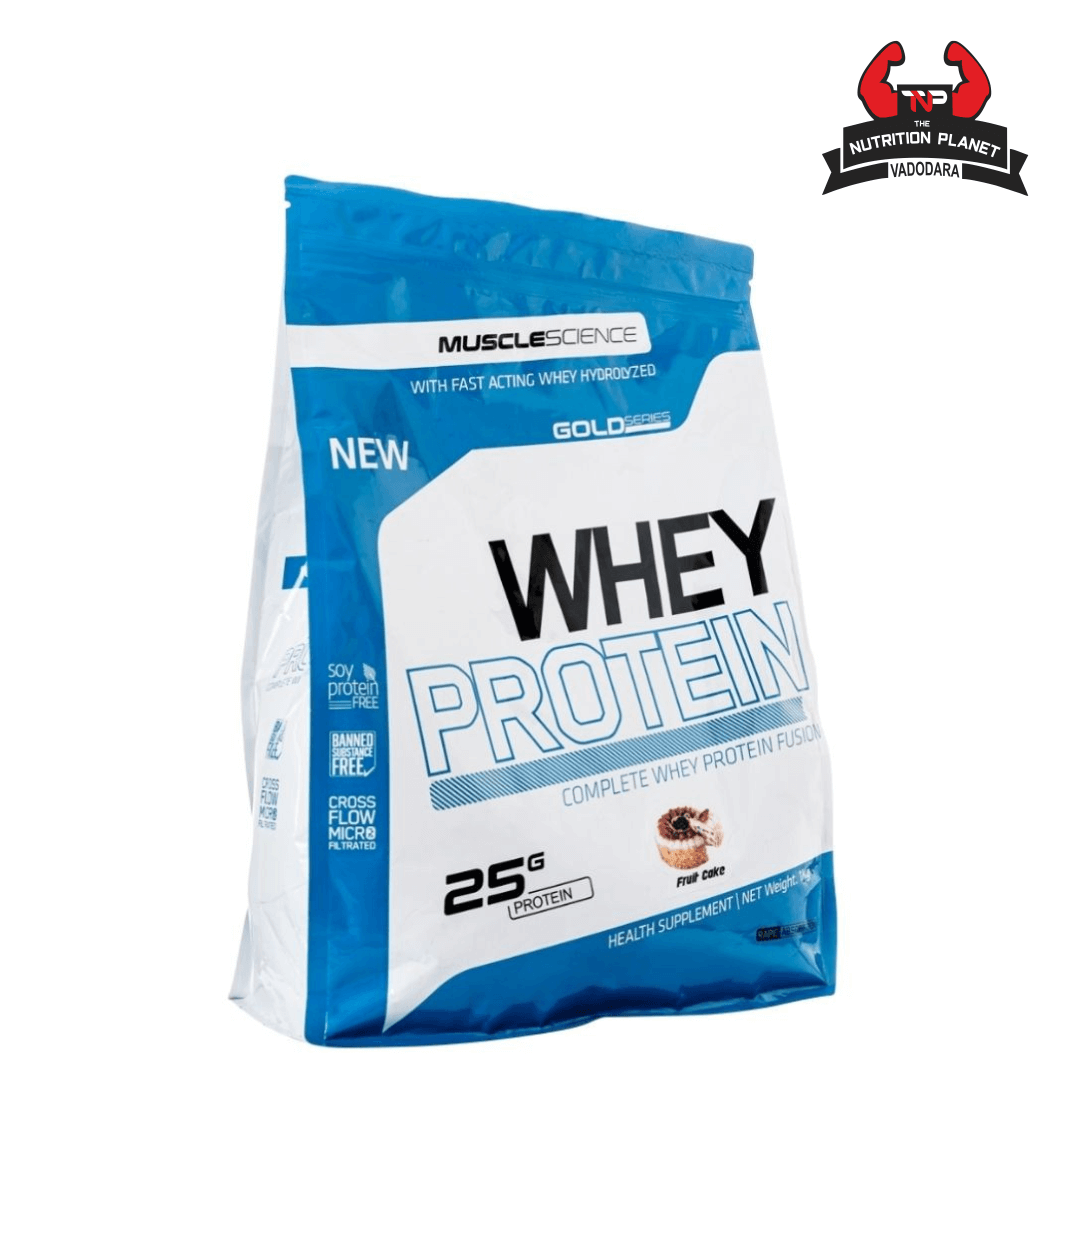 Muscle Science Gold Series Hydrolyzed Whey Protein